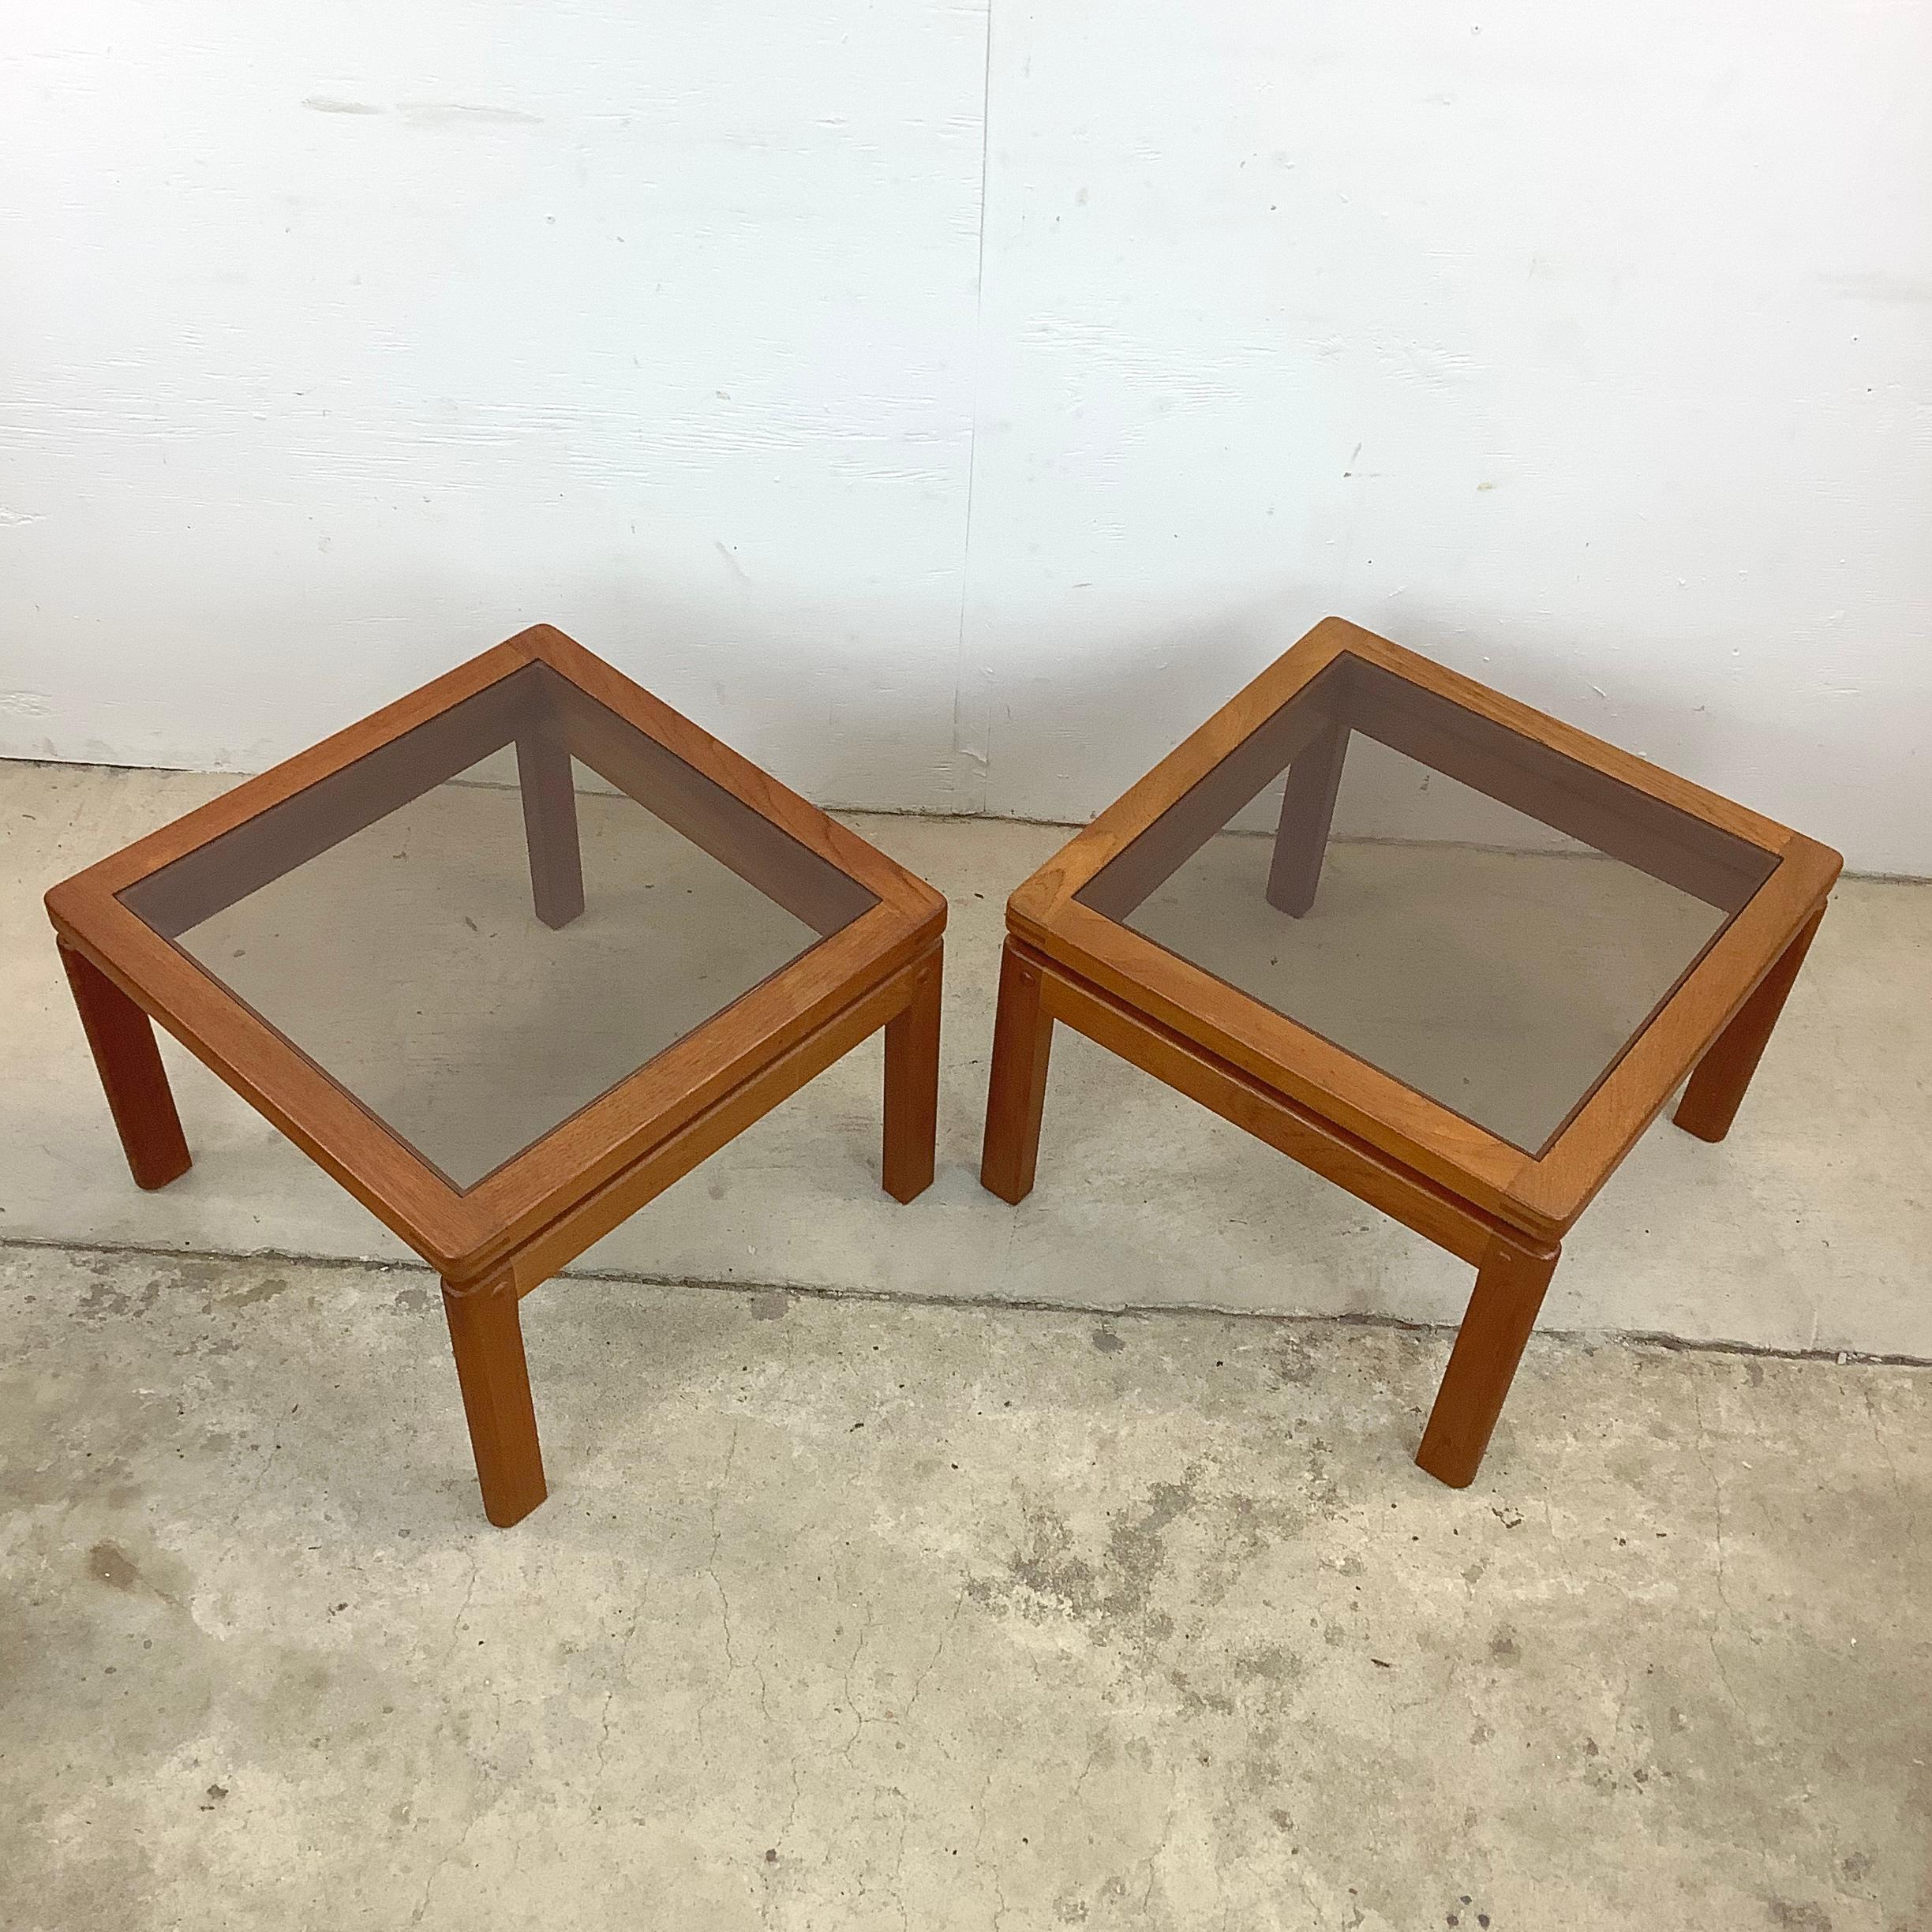 This remarkable pair of vintage Danish side tables are a testament to Scandinavian craftsmanship and timeless design. With exposed joinery and crafted from teak, these tables are a celebration of both the form and function of the 1960s.

Imagine